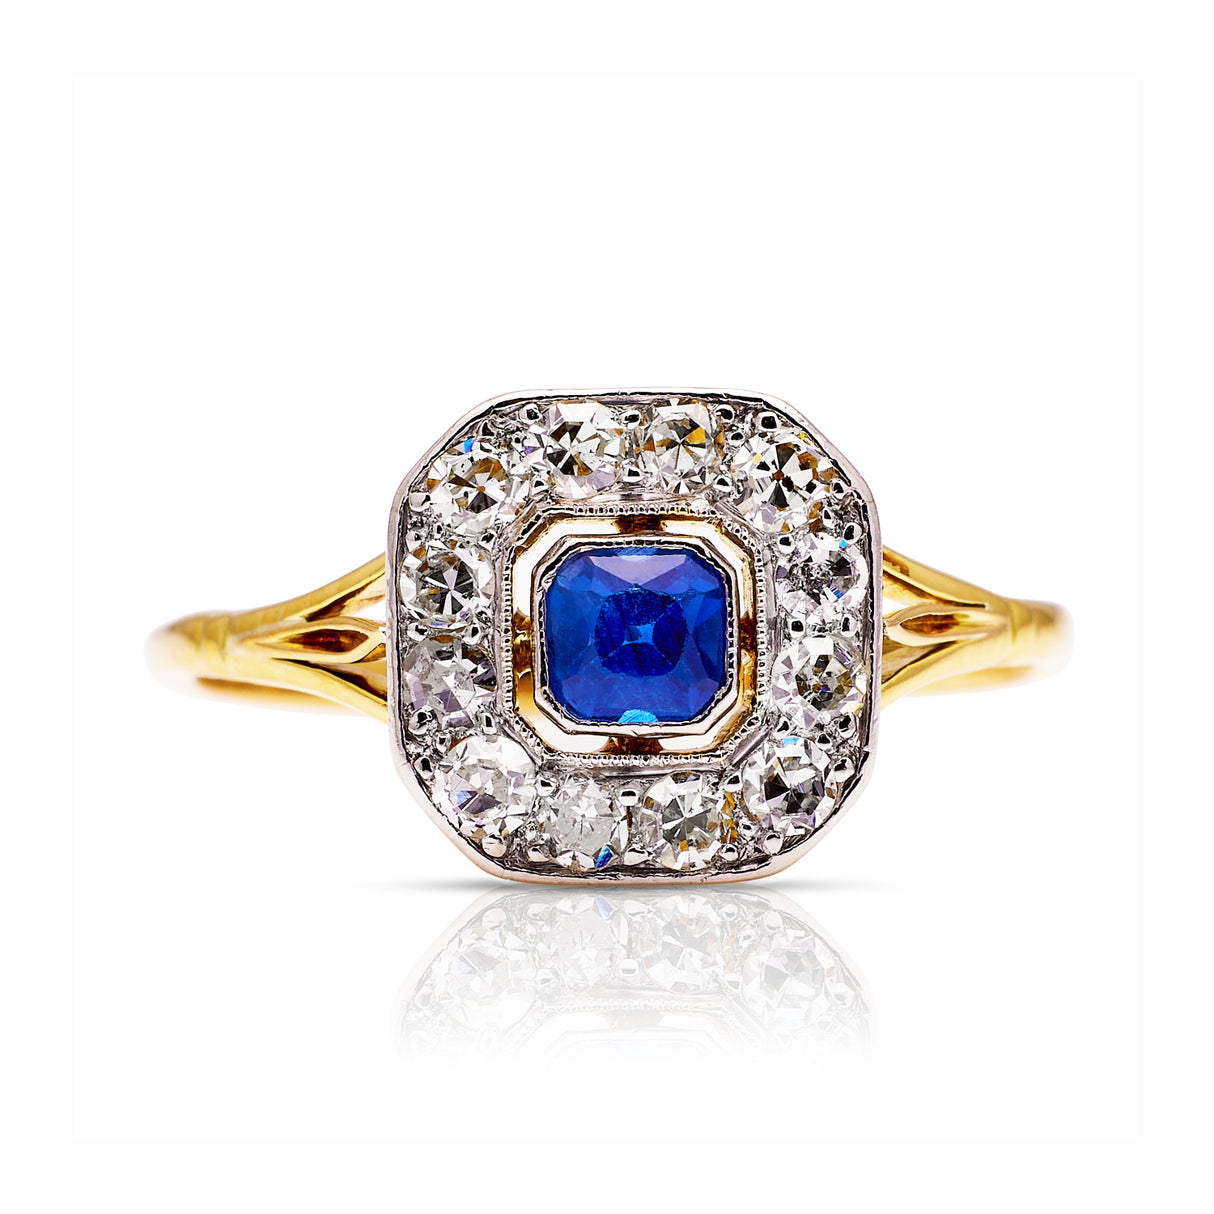 Sapphire and diamond engagement ring, front view.